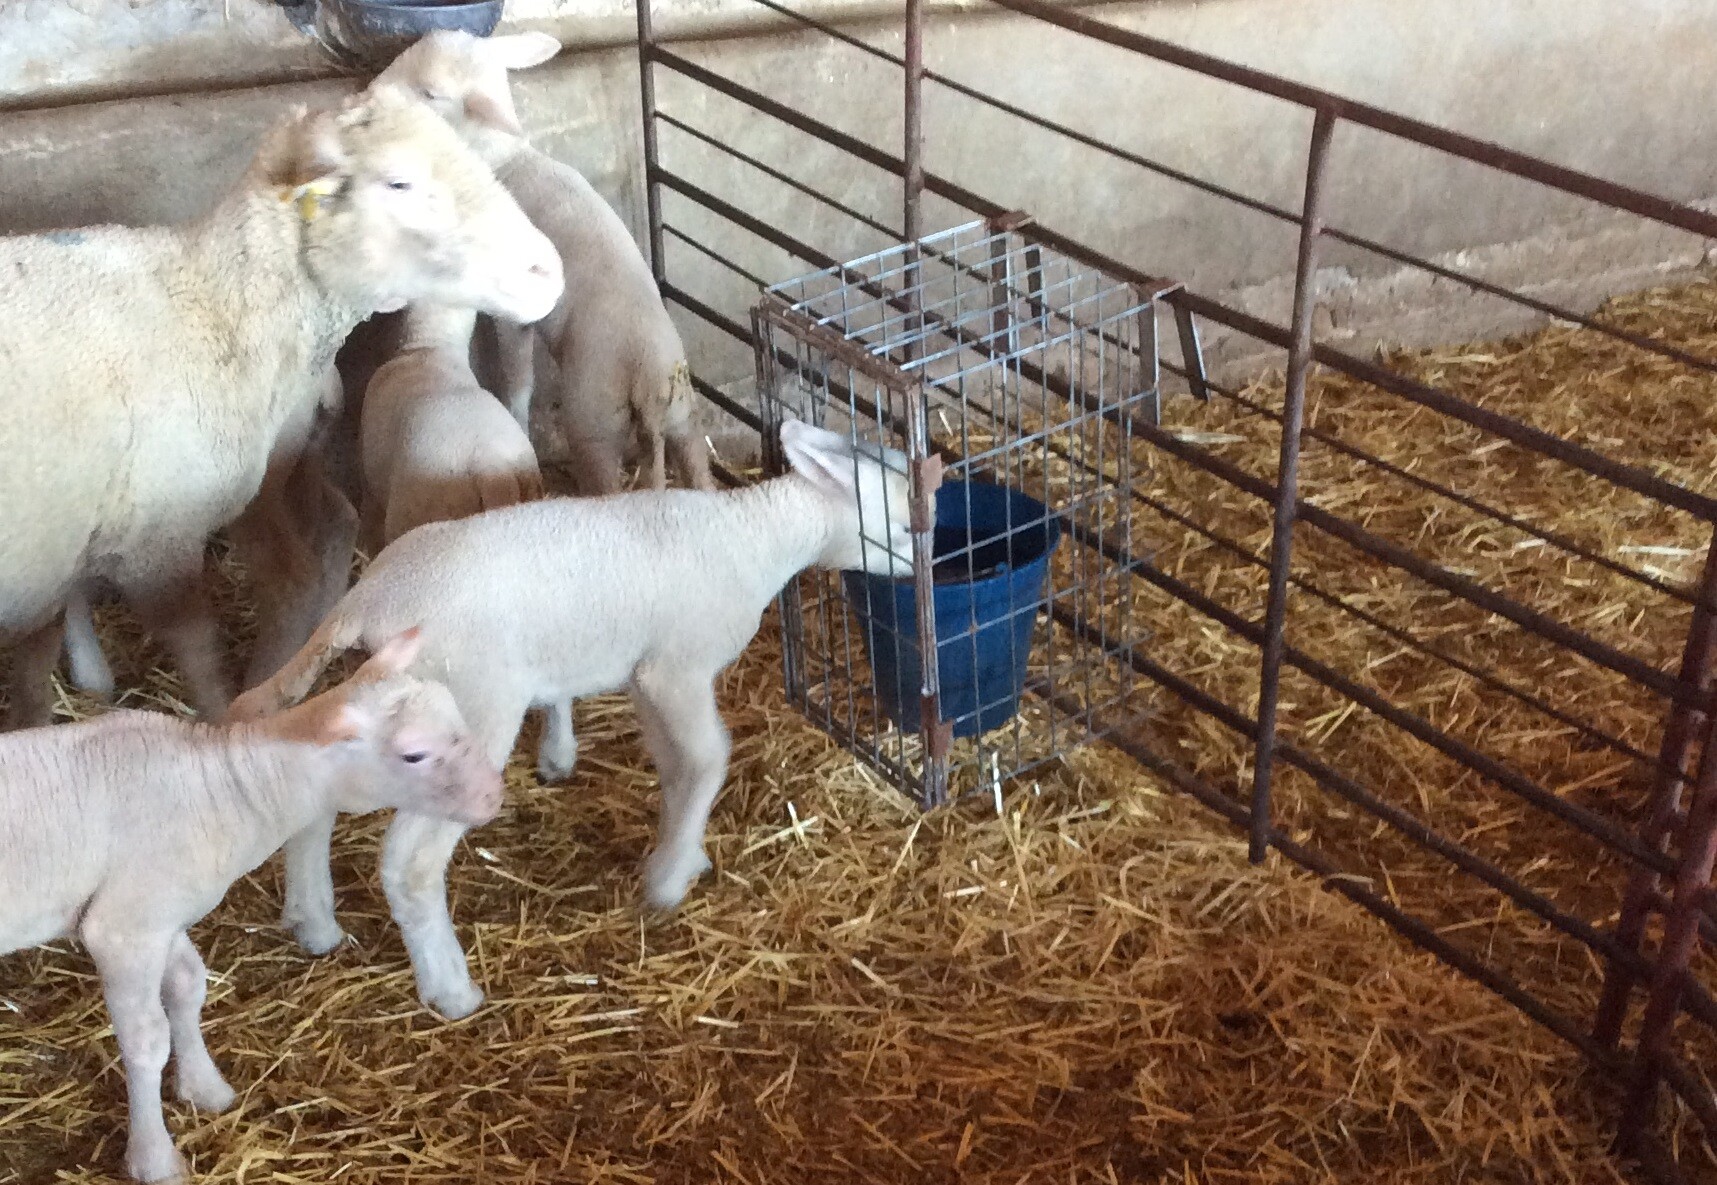 Cage to provide water lo lambs